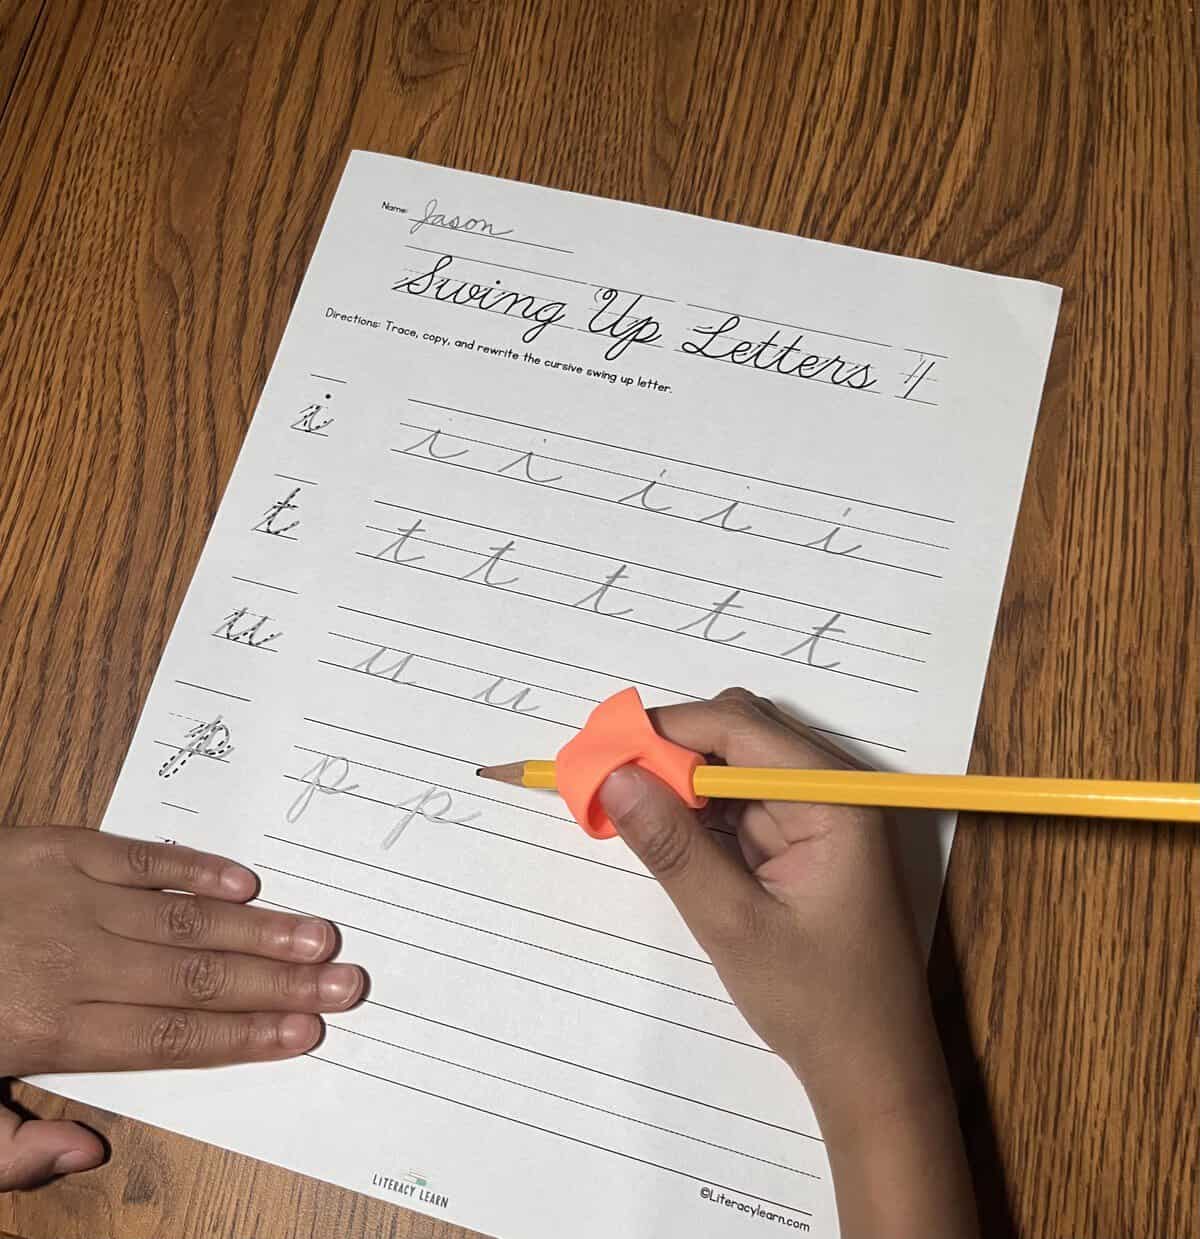 Photograph of students hands using a pencil grip completing a cursive writing worksheet.